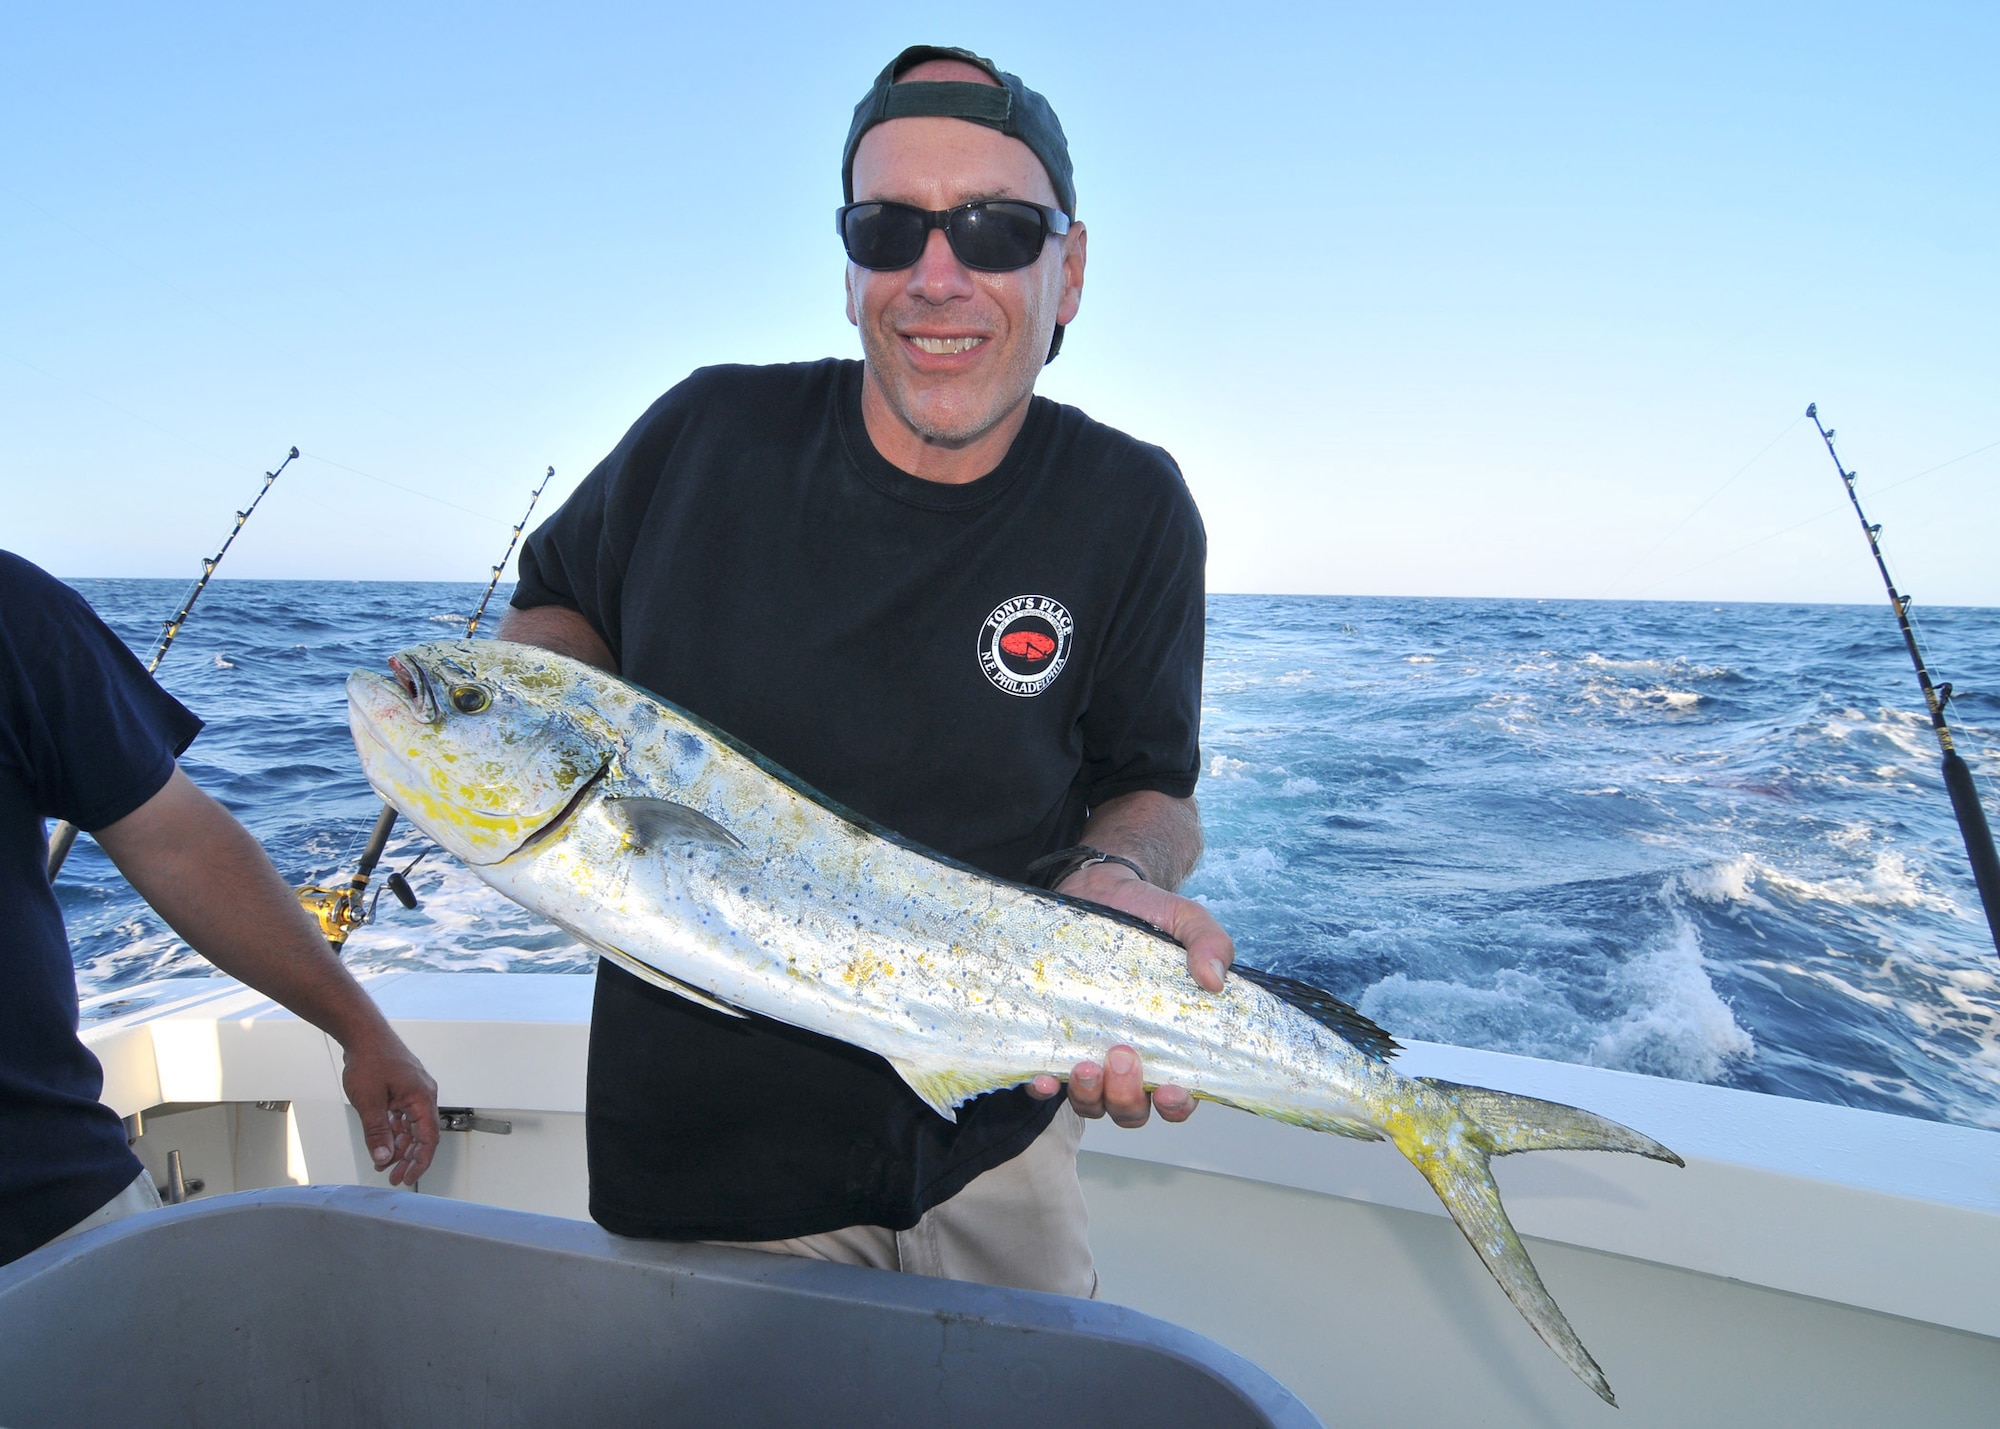 A picture of U.S. Army Sgt. First Class Patrick Fry, flight operations Soldier with the 57th Troop Command, New Jersey Army National Guard, holding a mahi mahi.